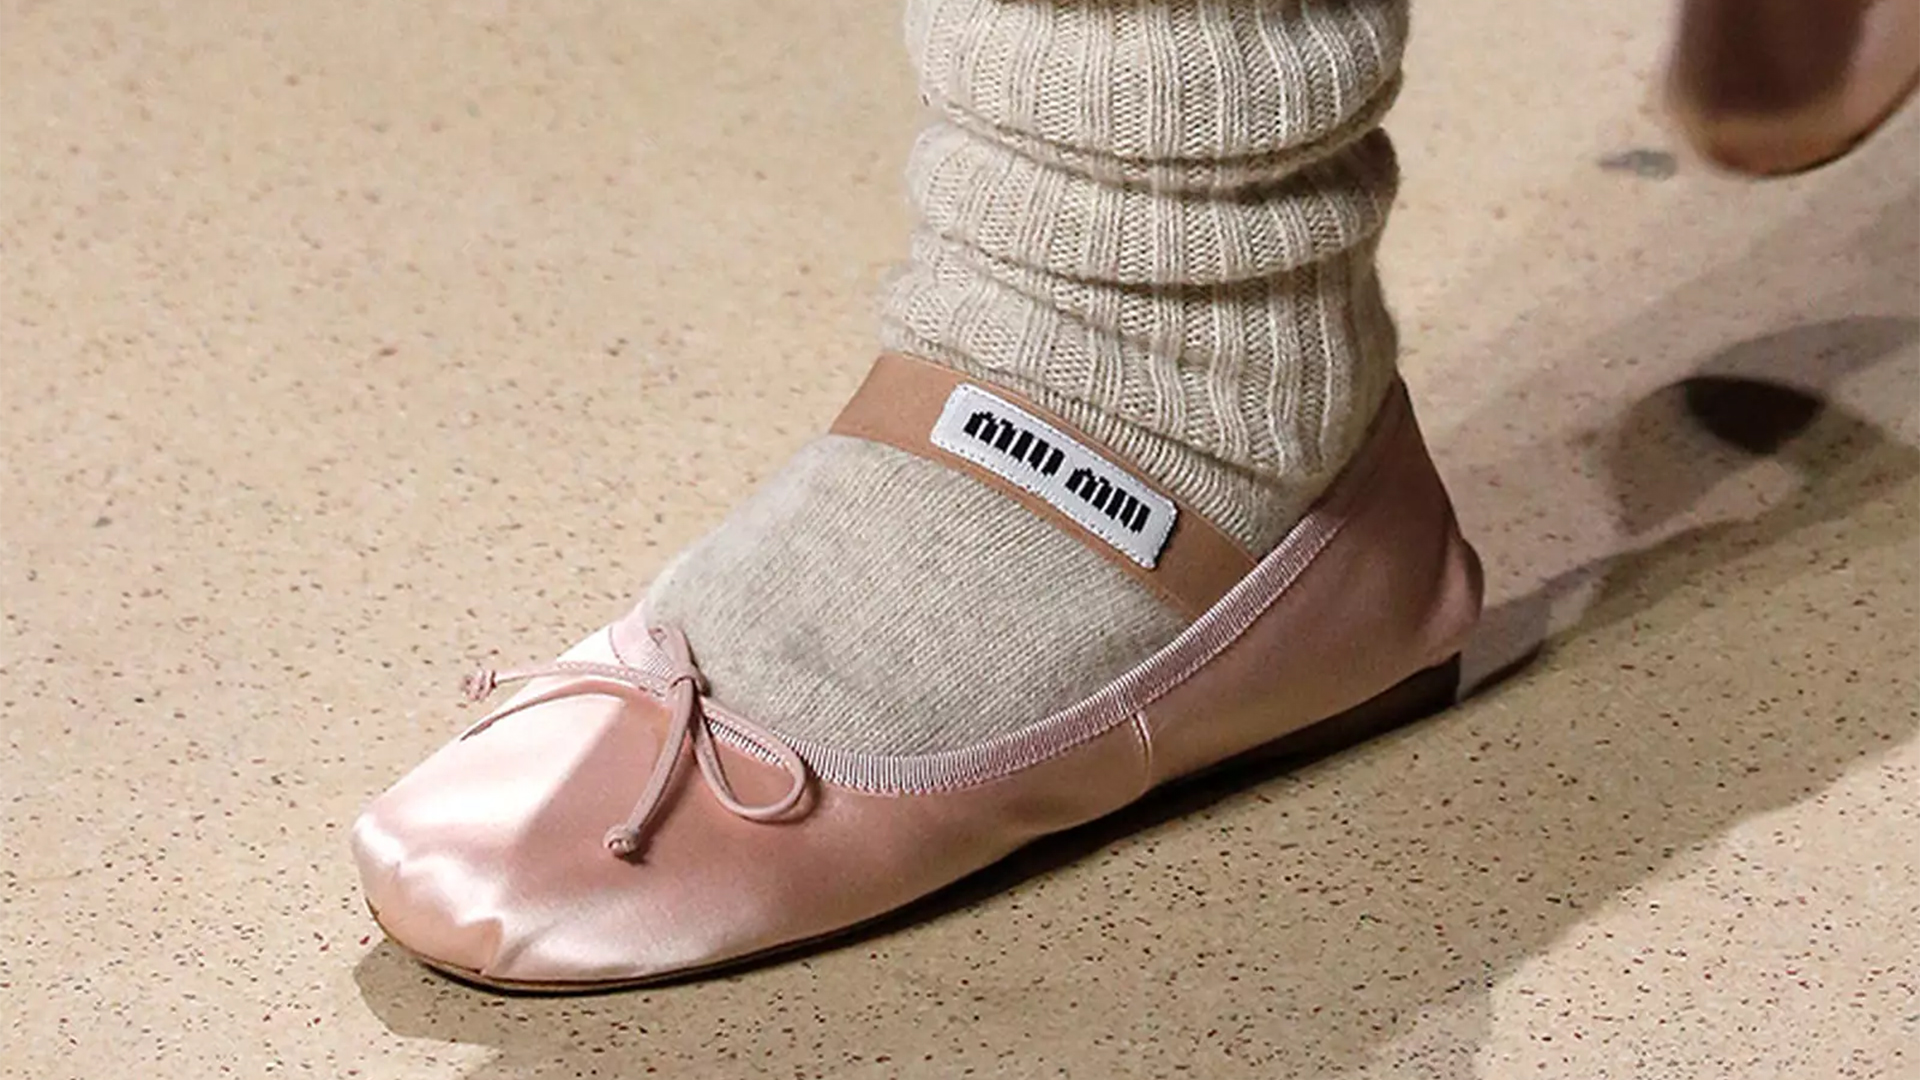 These Miu Miu Satin Ballet Flats Are About to Go Viral